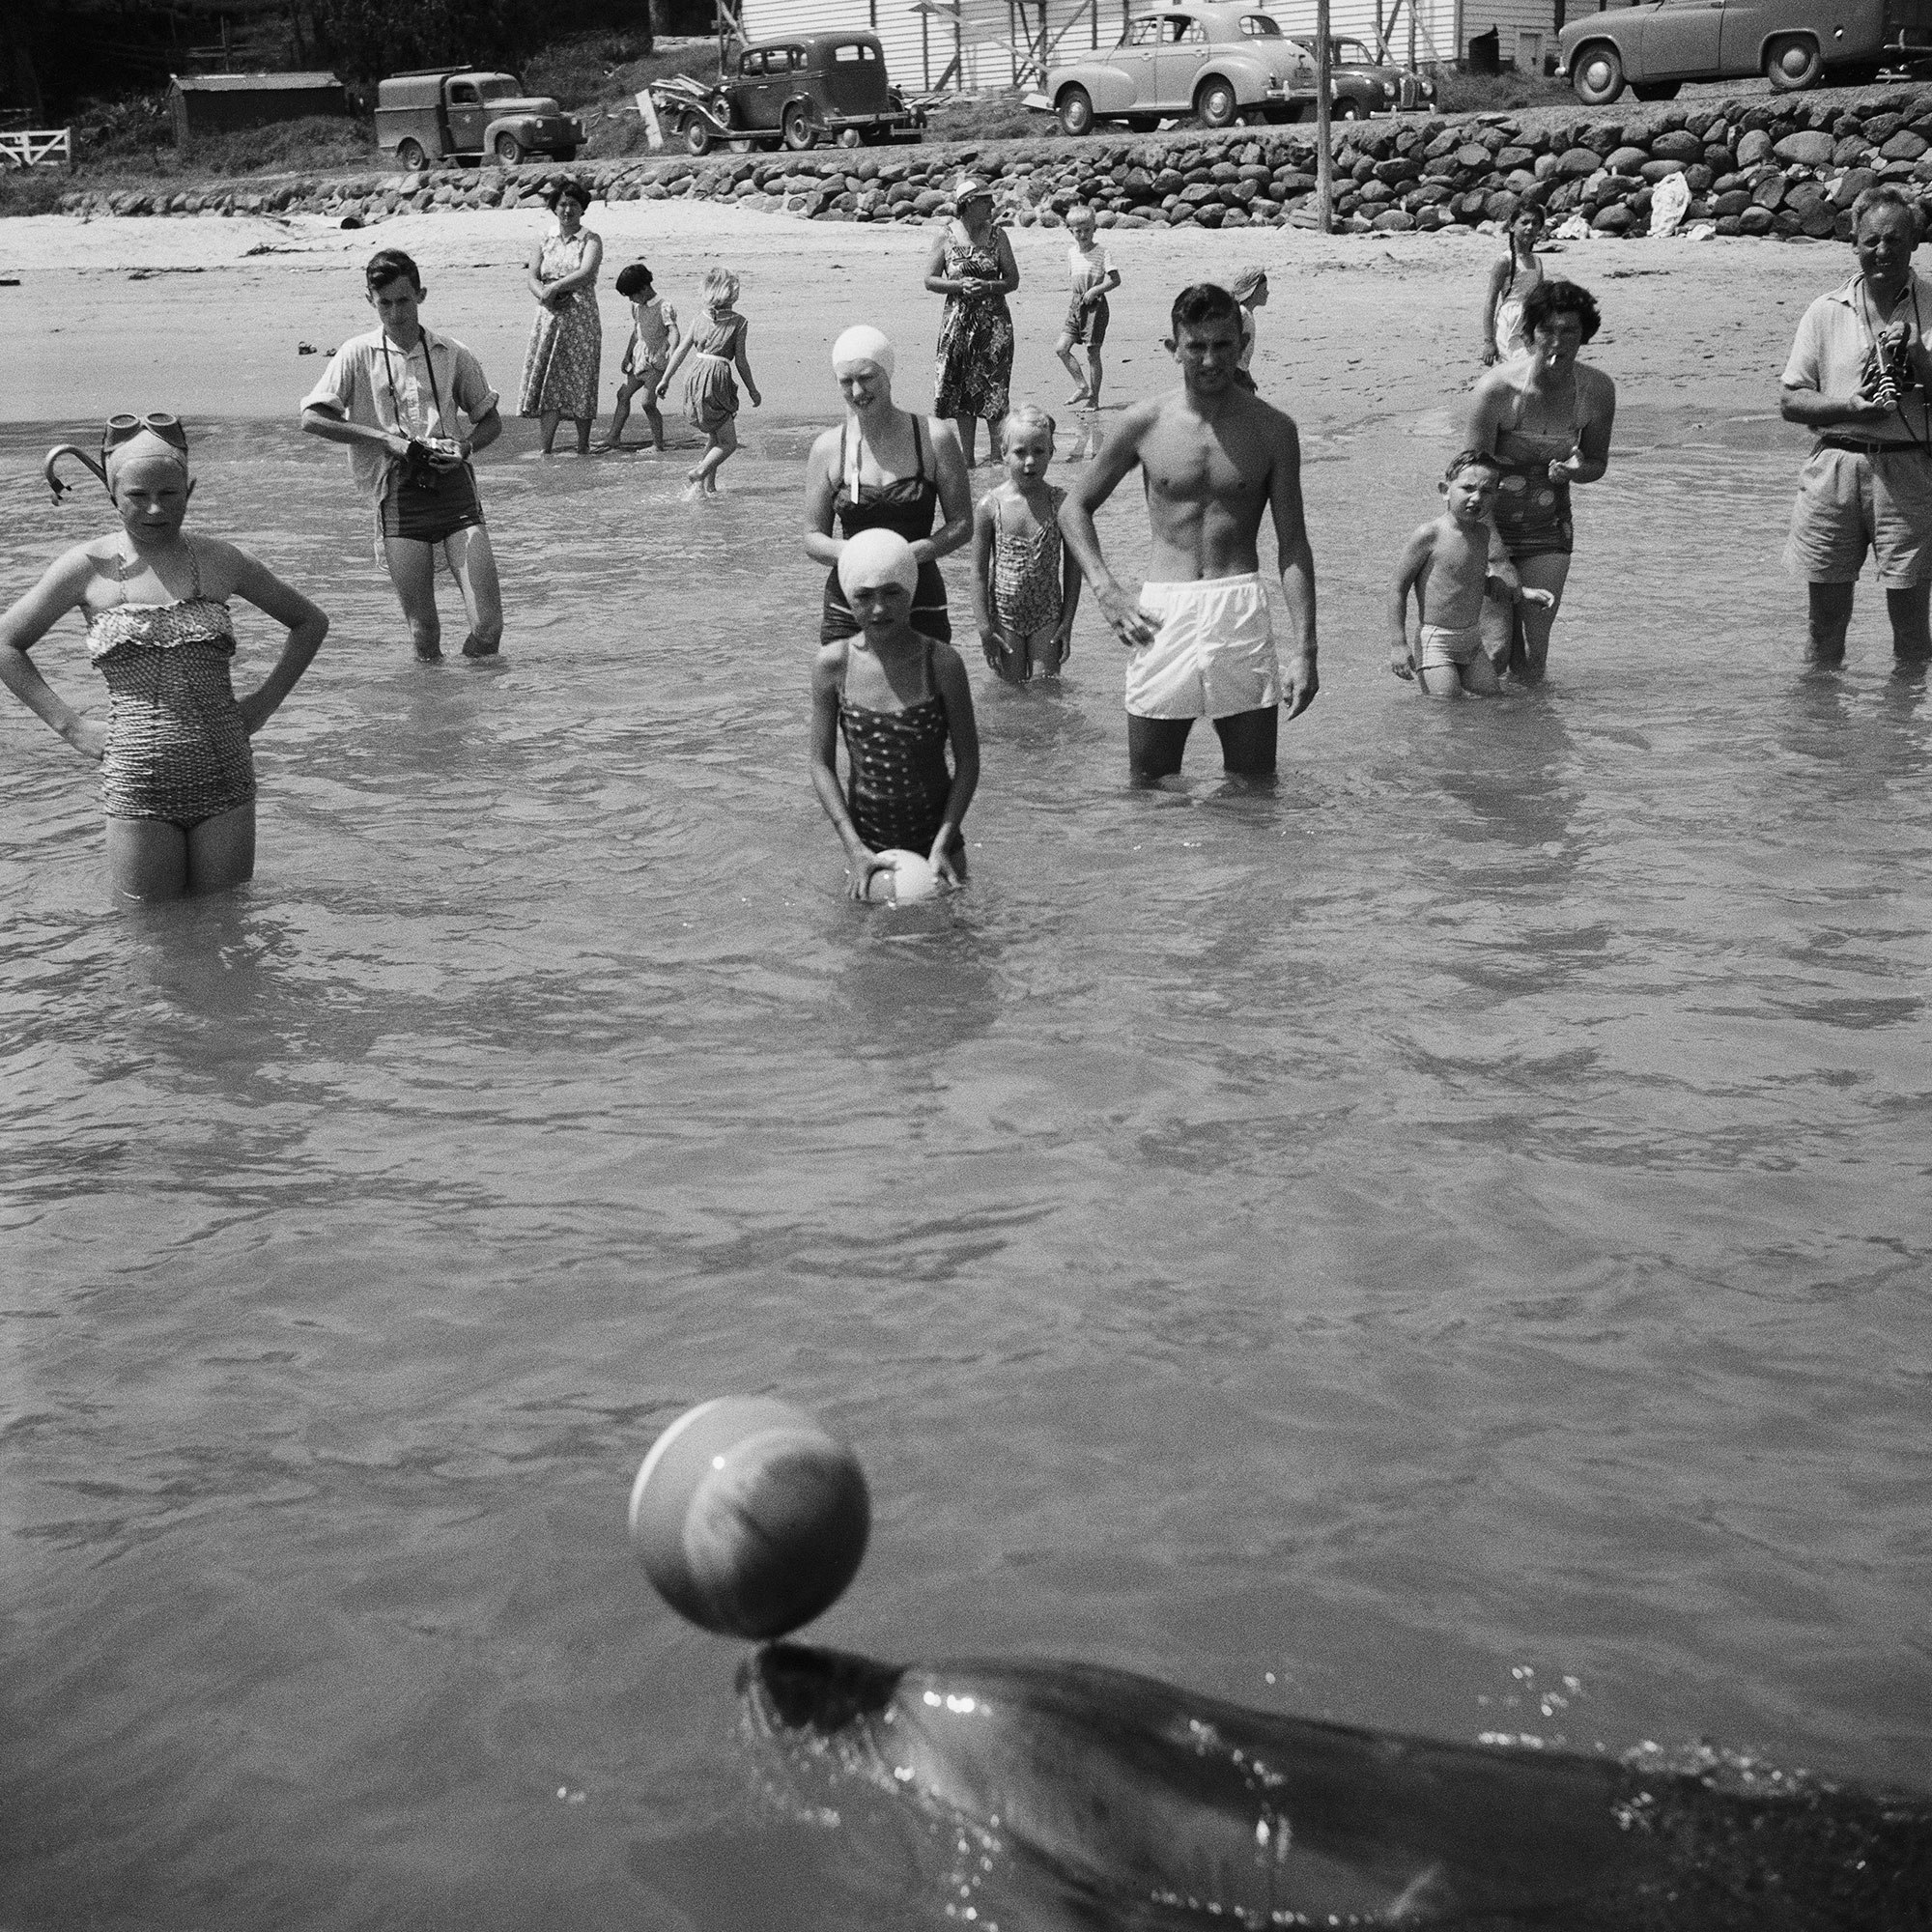 adults and children in the sea playing with a dolphin in the foreground